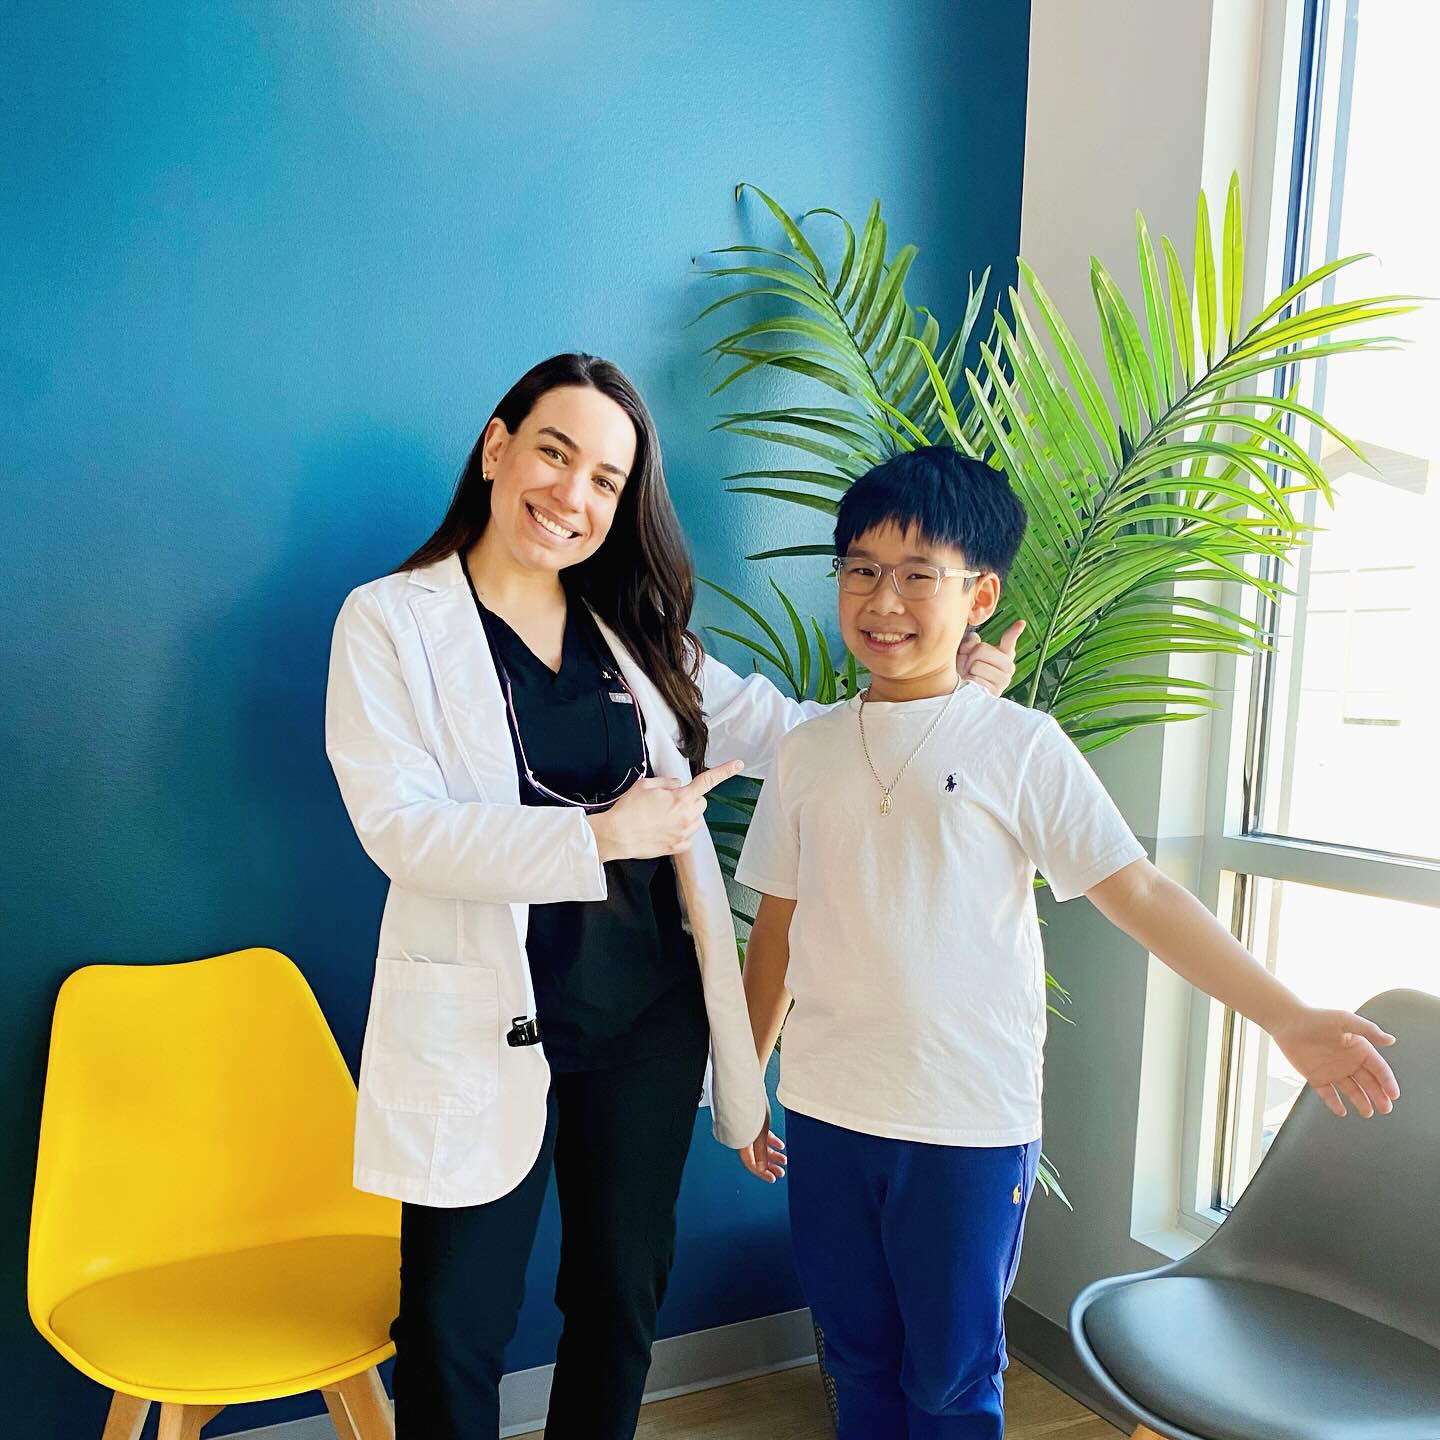 young patient laughing with doctor